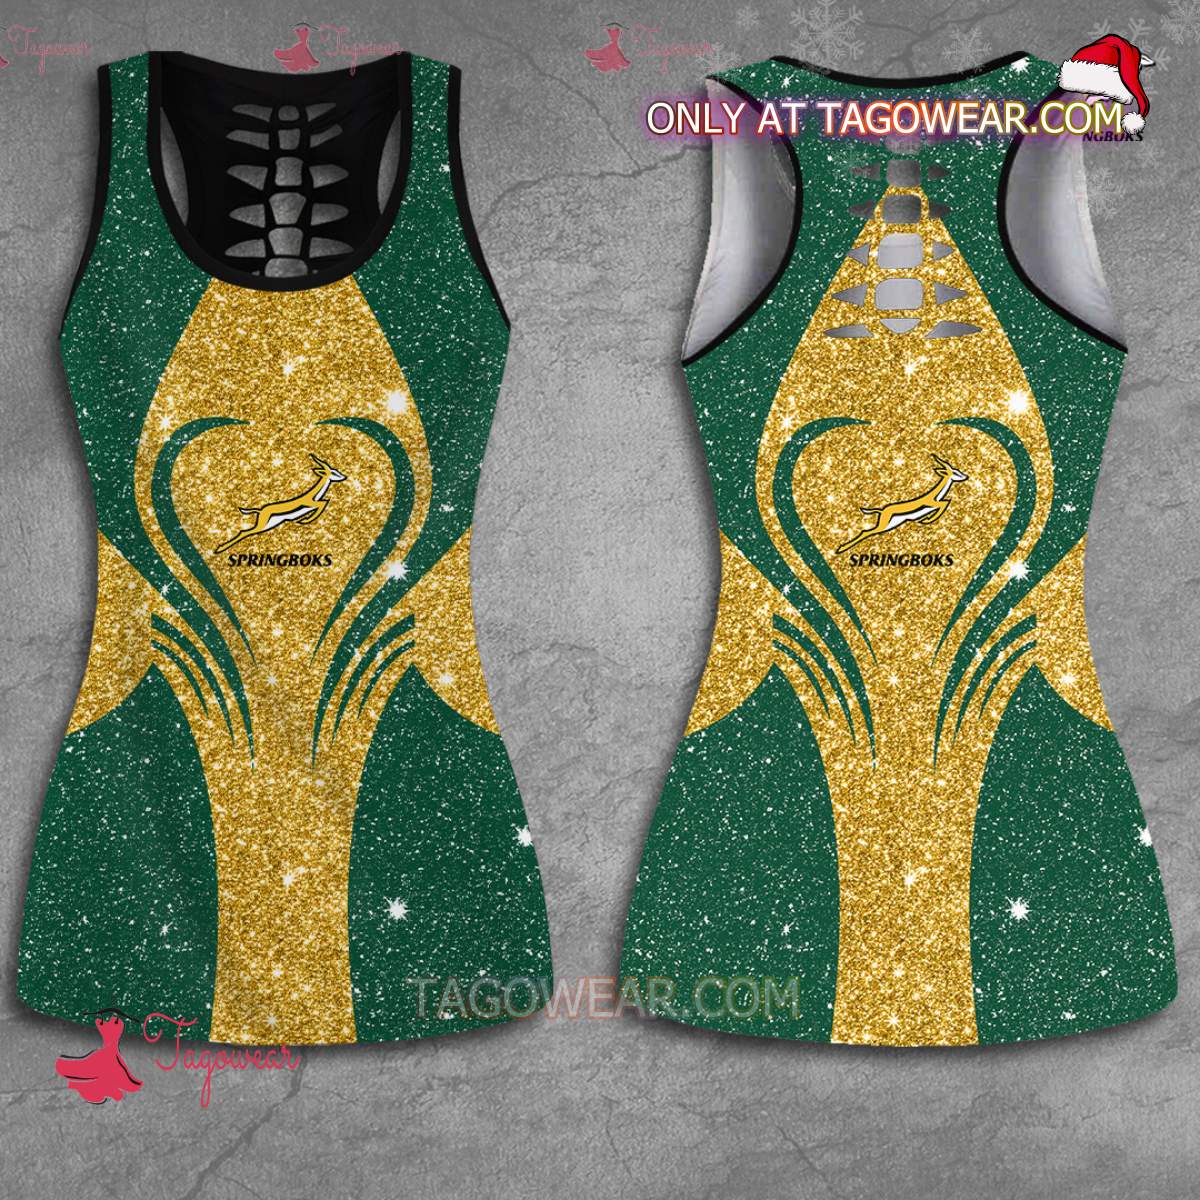 Springboks South Africa Rugby World Cup Glitter Hollow Tank Top And Leggings a